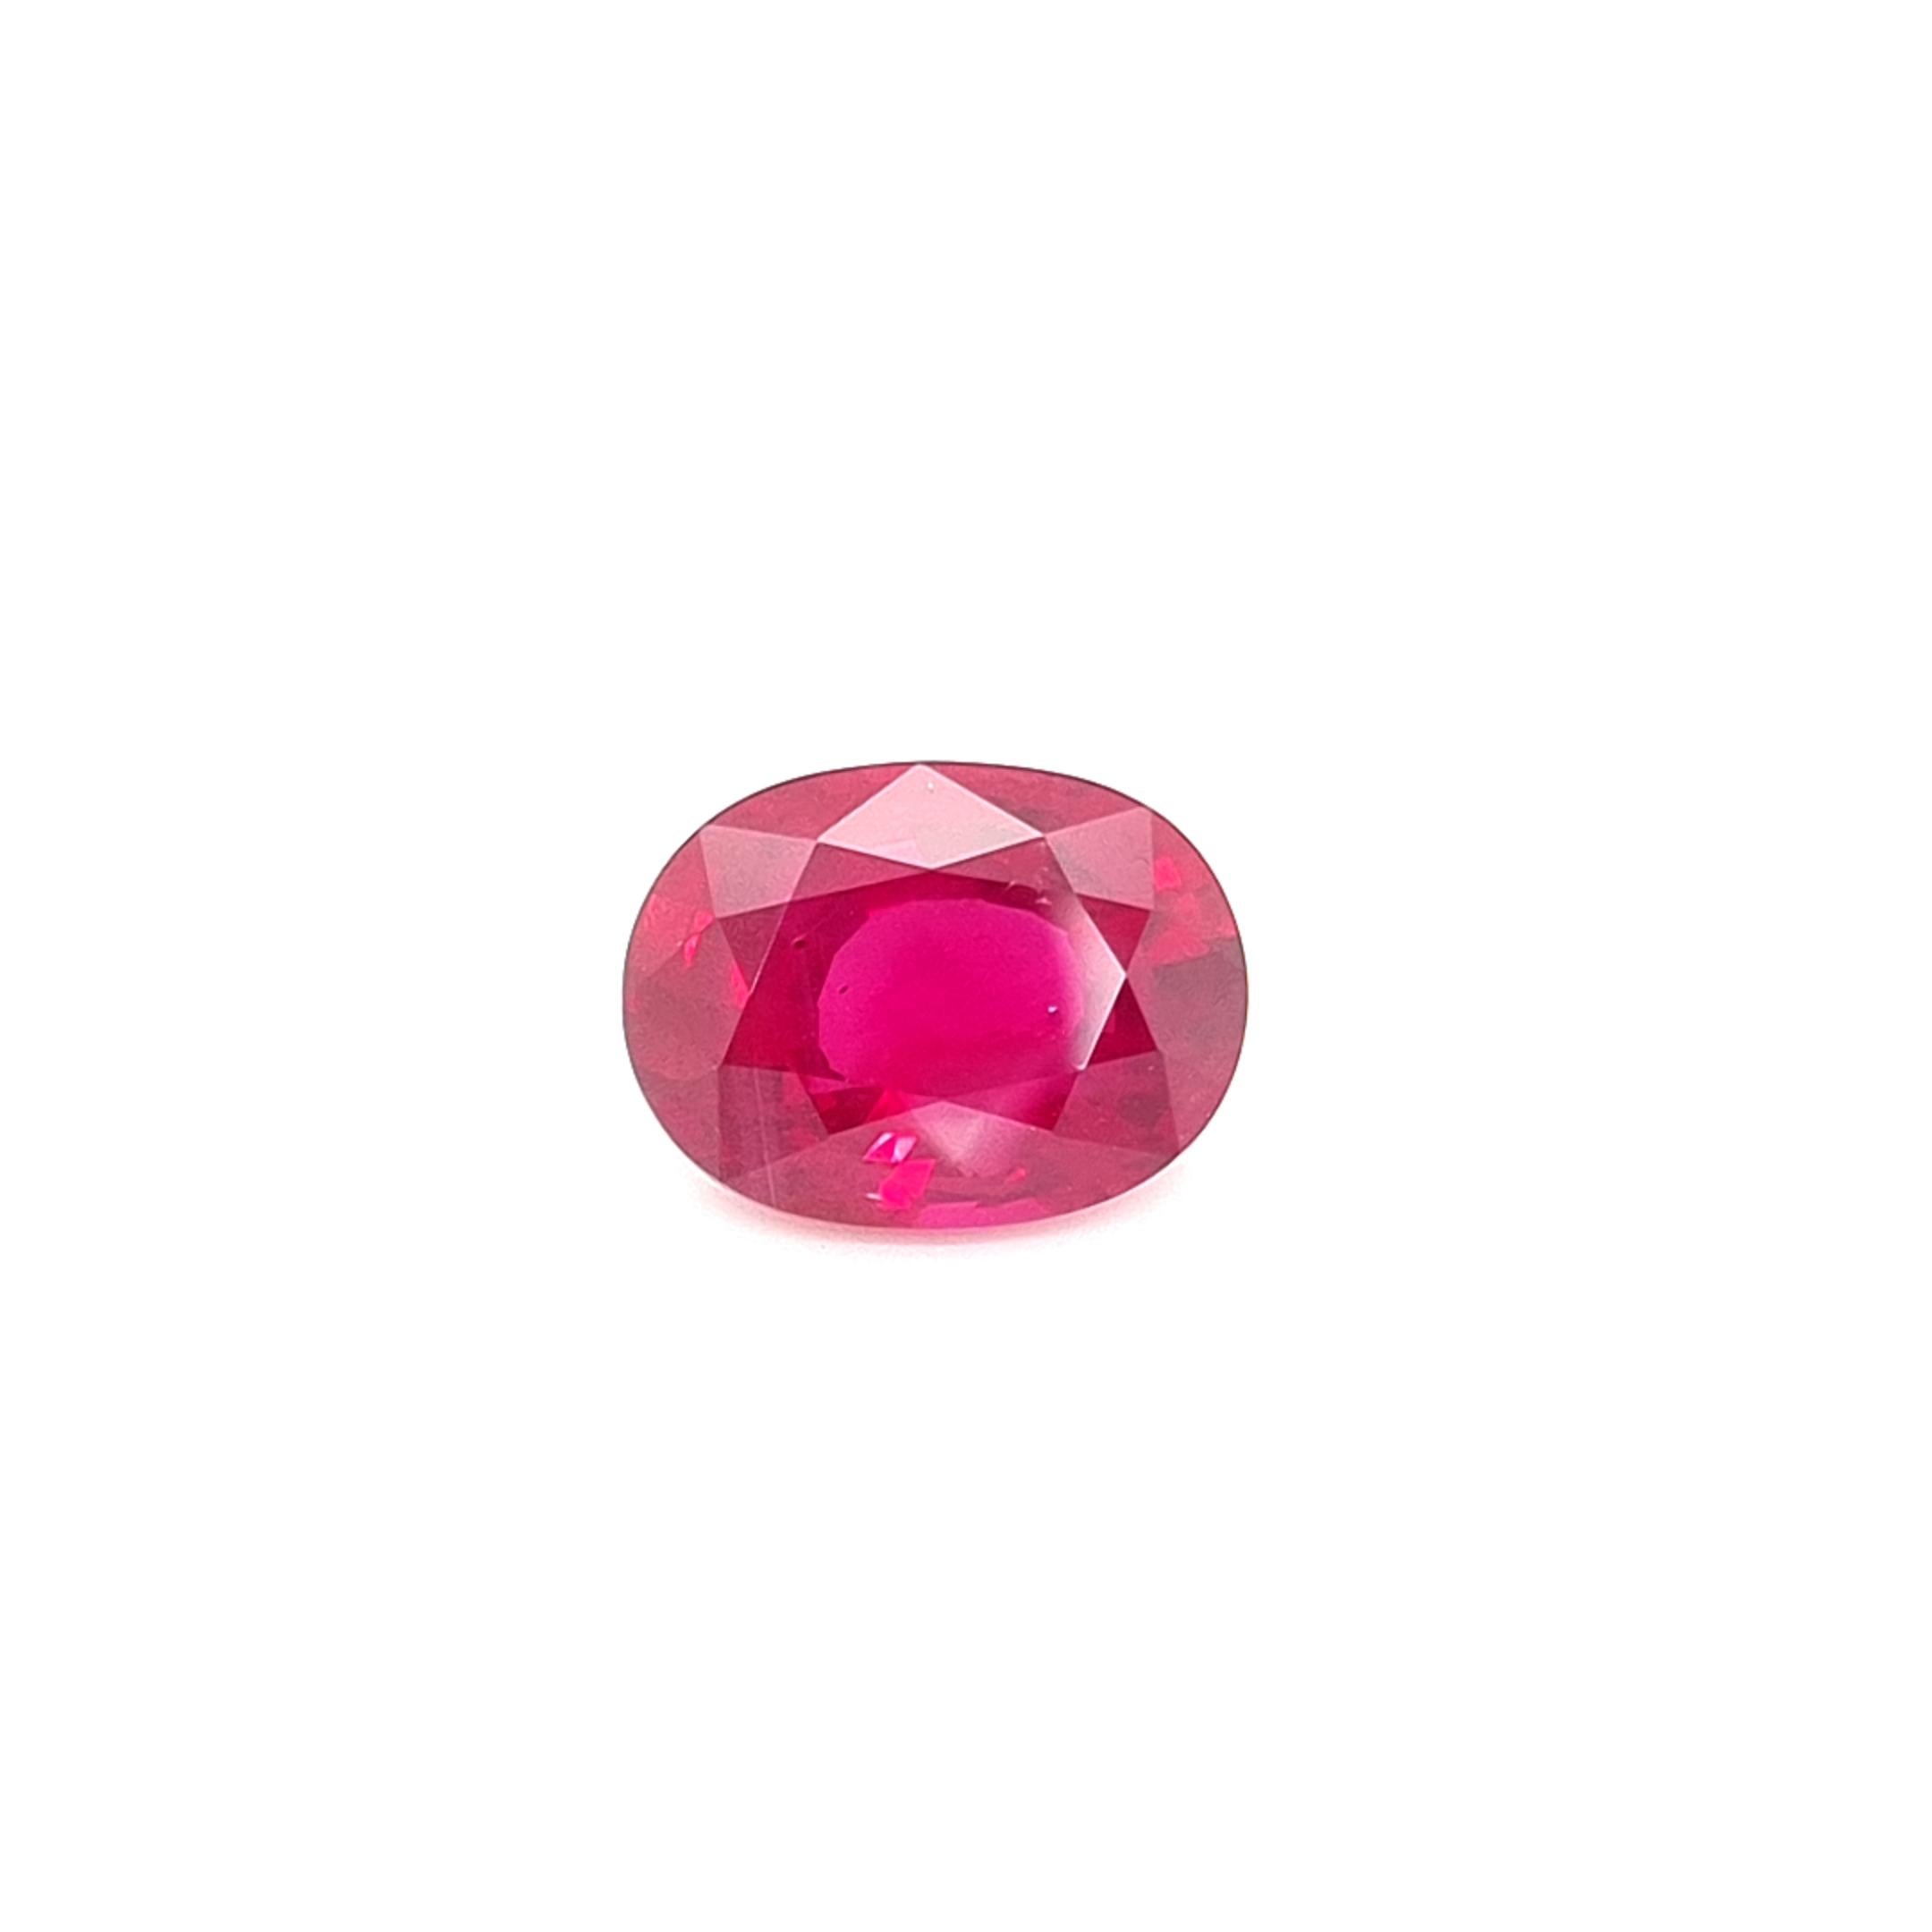 This 5ct unheated ruby from Mozambique exhibits a desirable array of features. 

With a weight of over 5 carats, this stone is of substantial size. As well as the fact that it is spared of any thermal enhancement, or 'unheated' as known in the gem